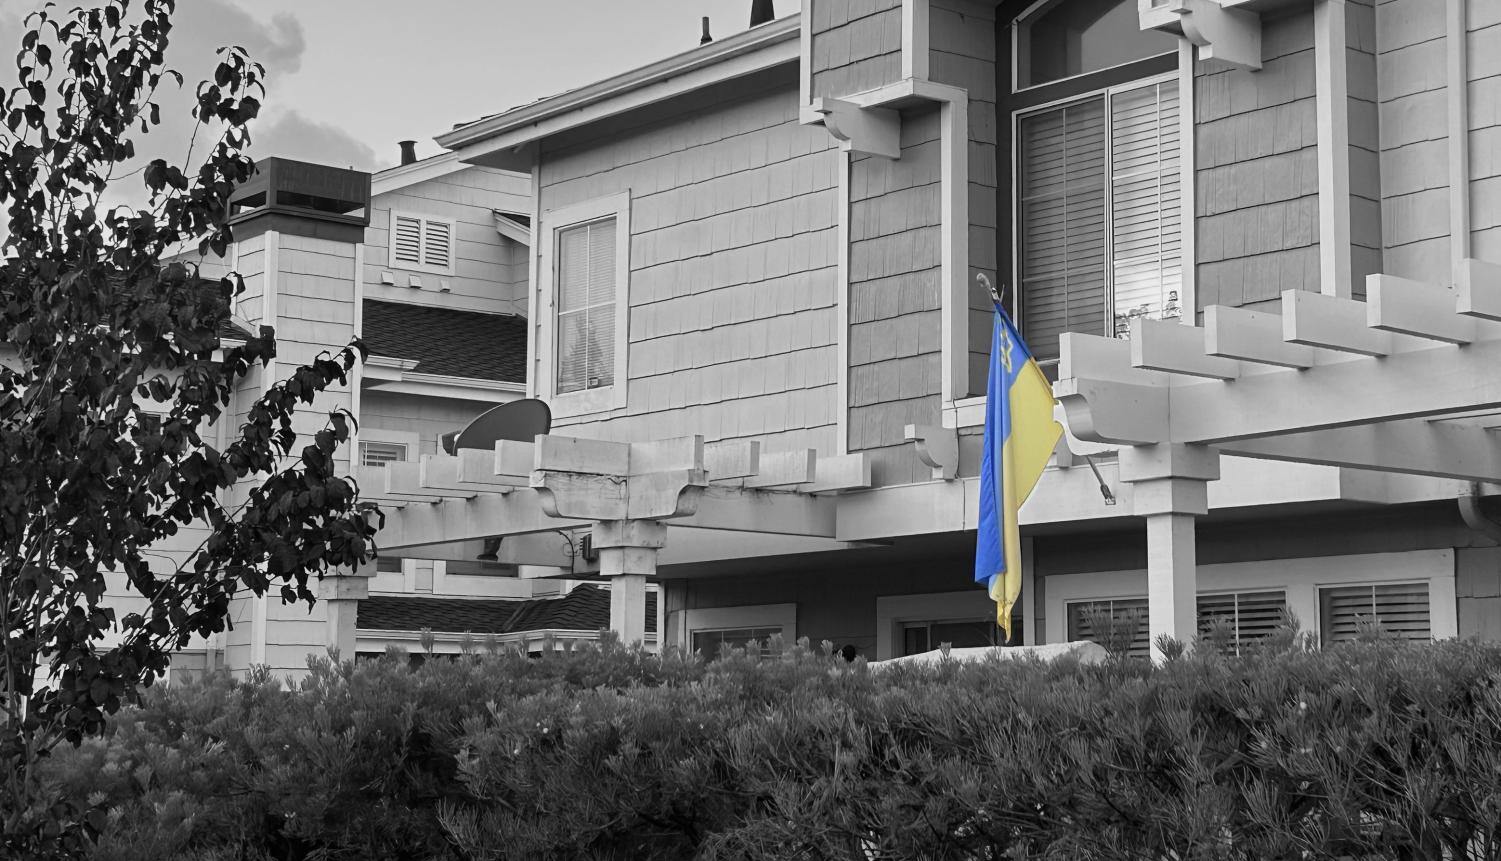 Bay Area residents hang up the Ukrainian flag outside their house to show their support for Ukraine.